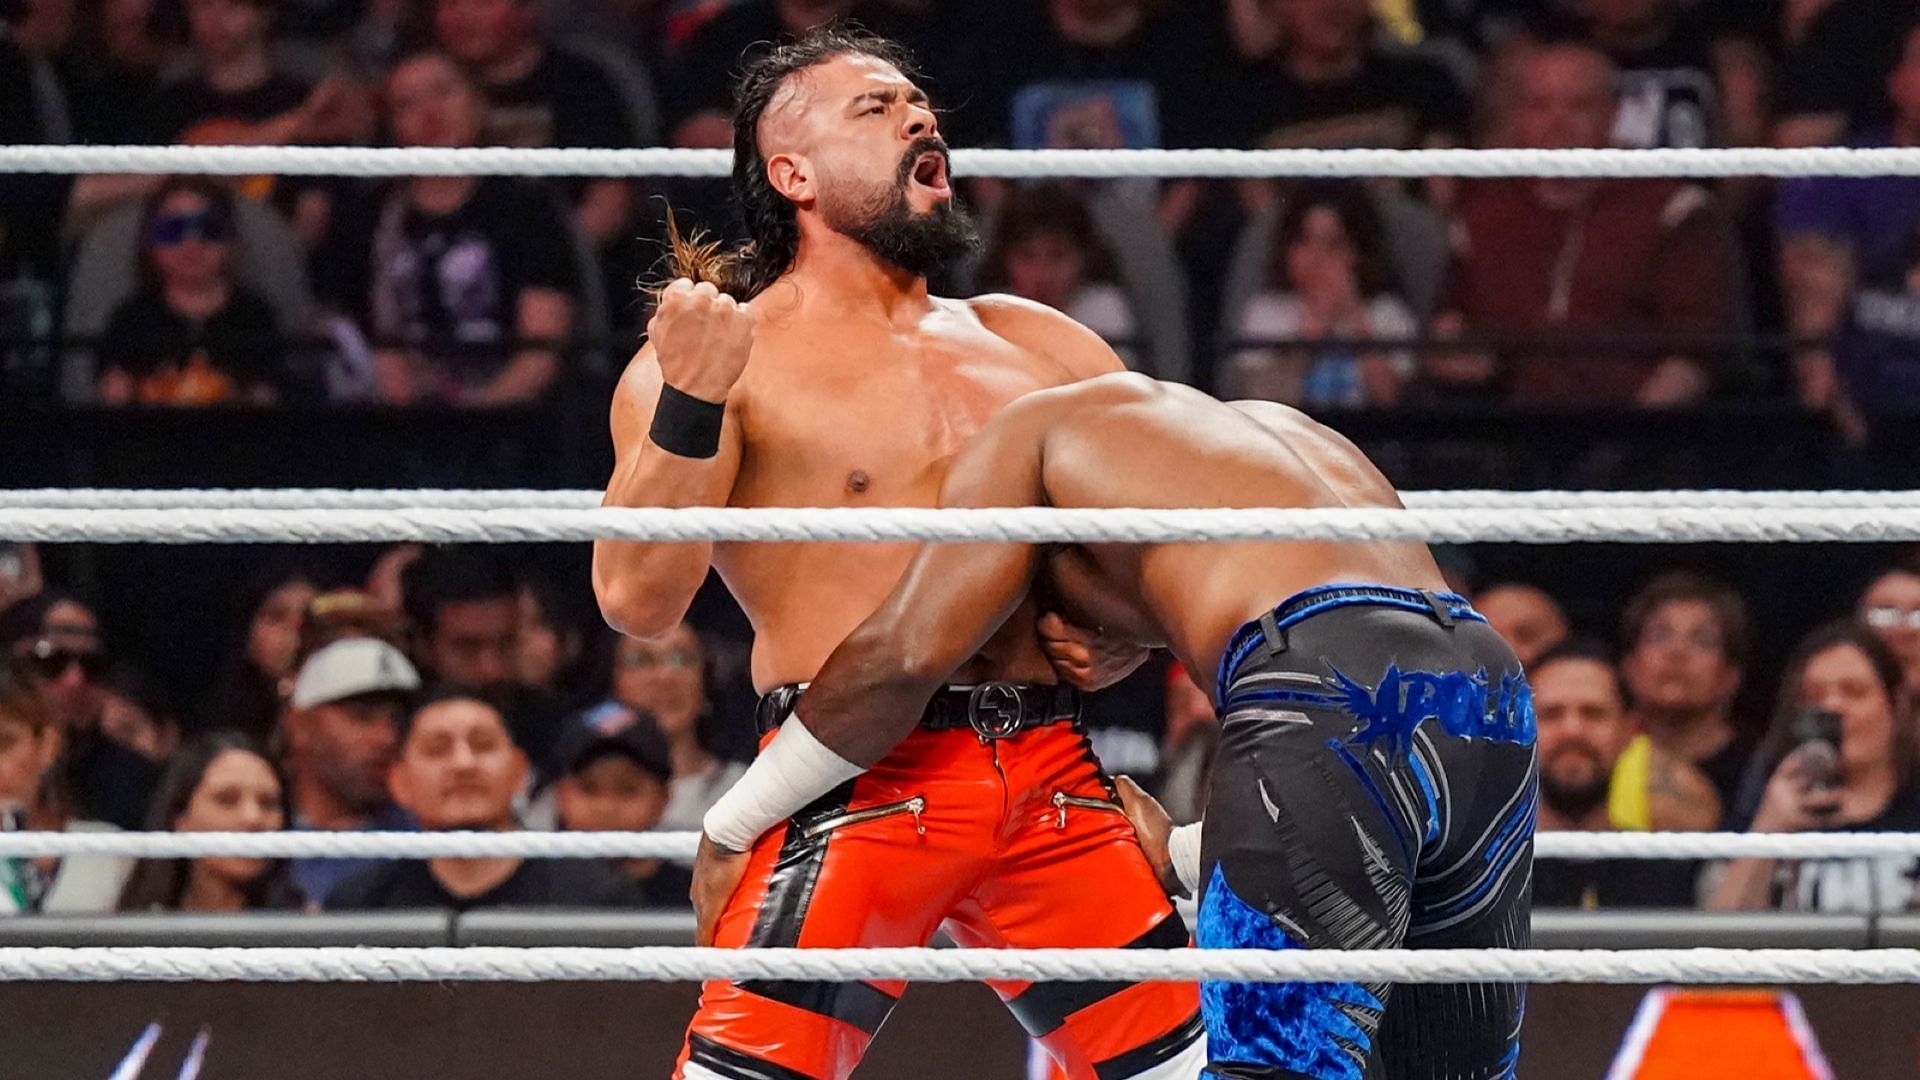 Andrade prepares to secure a win over Apollo Crews on WWE RAW